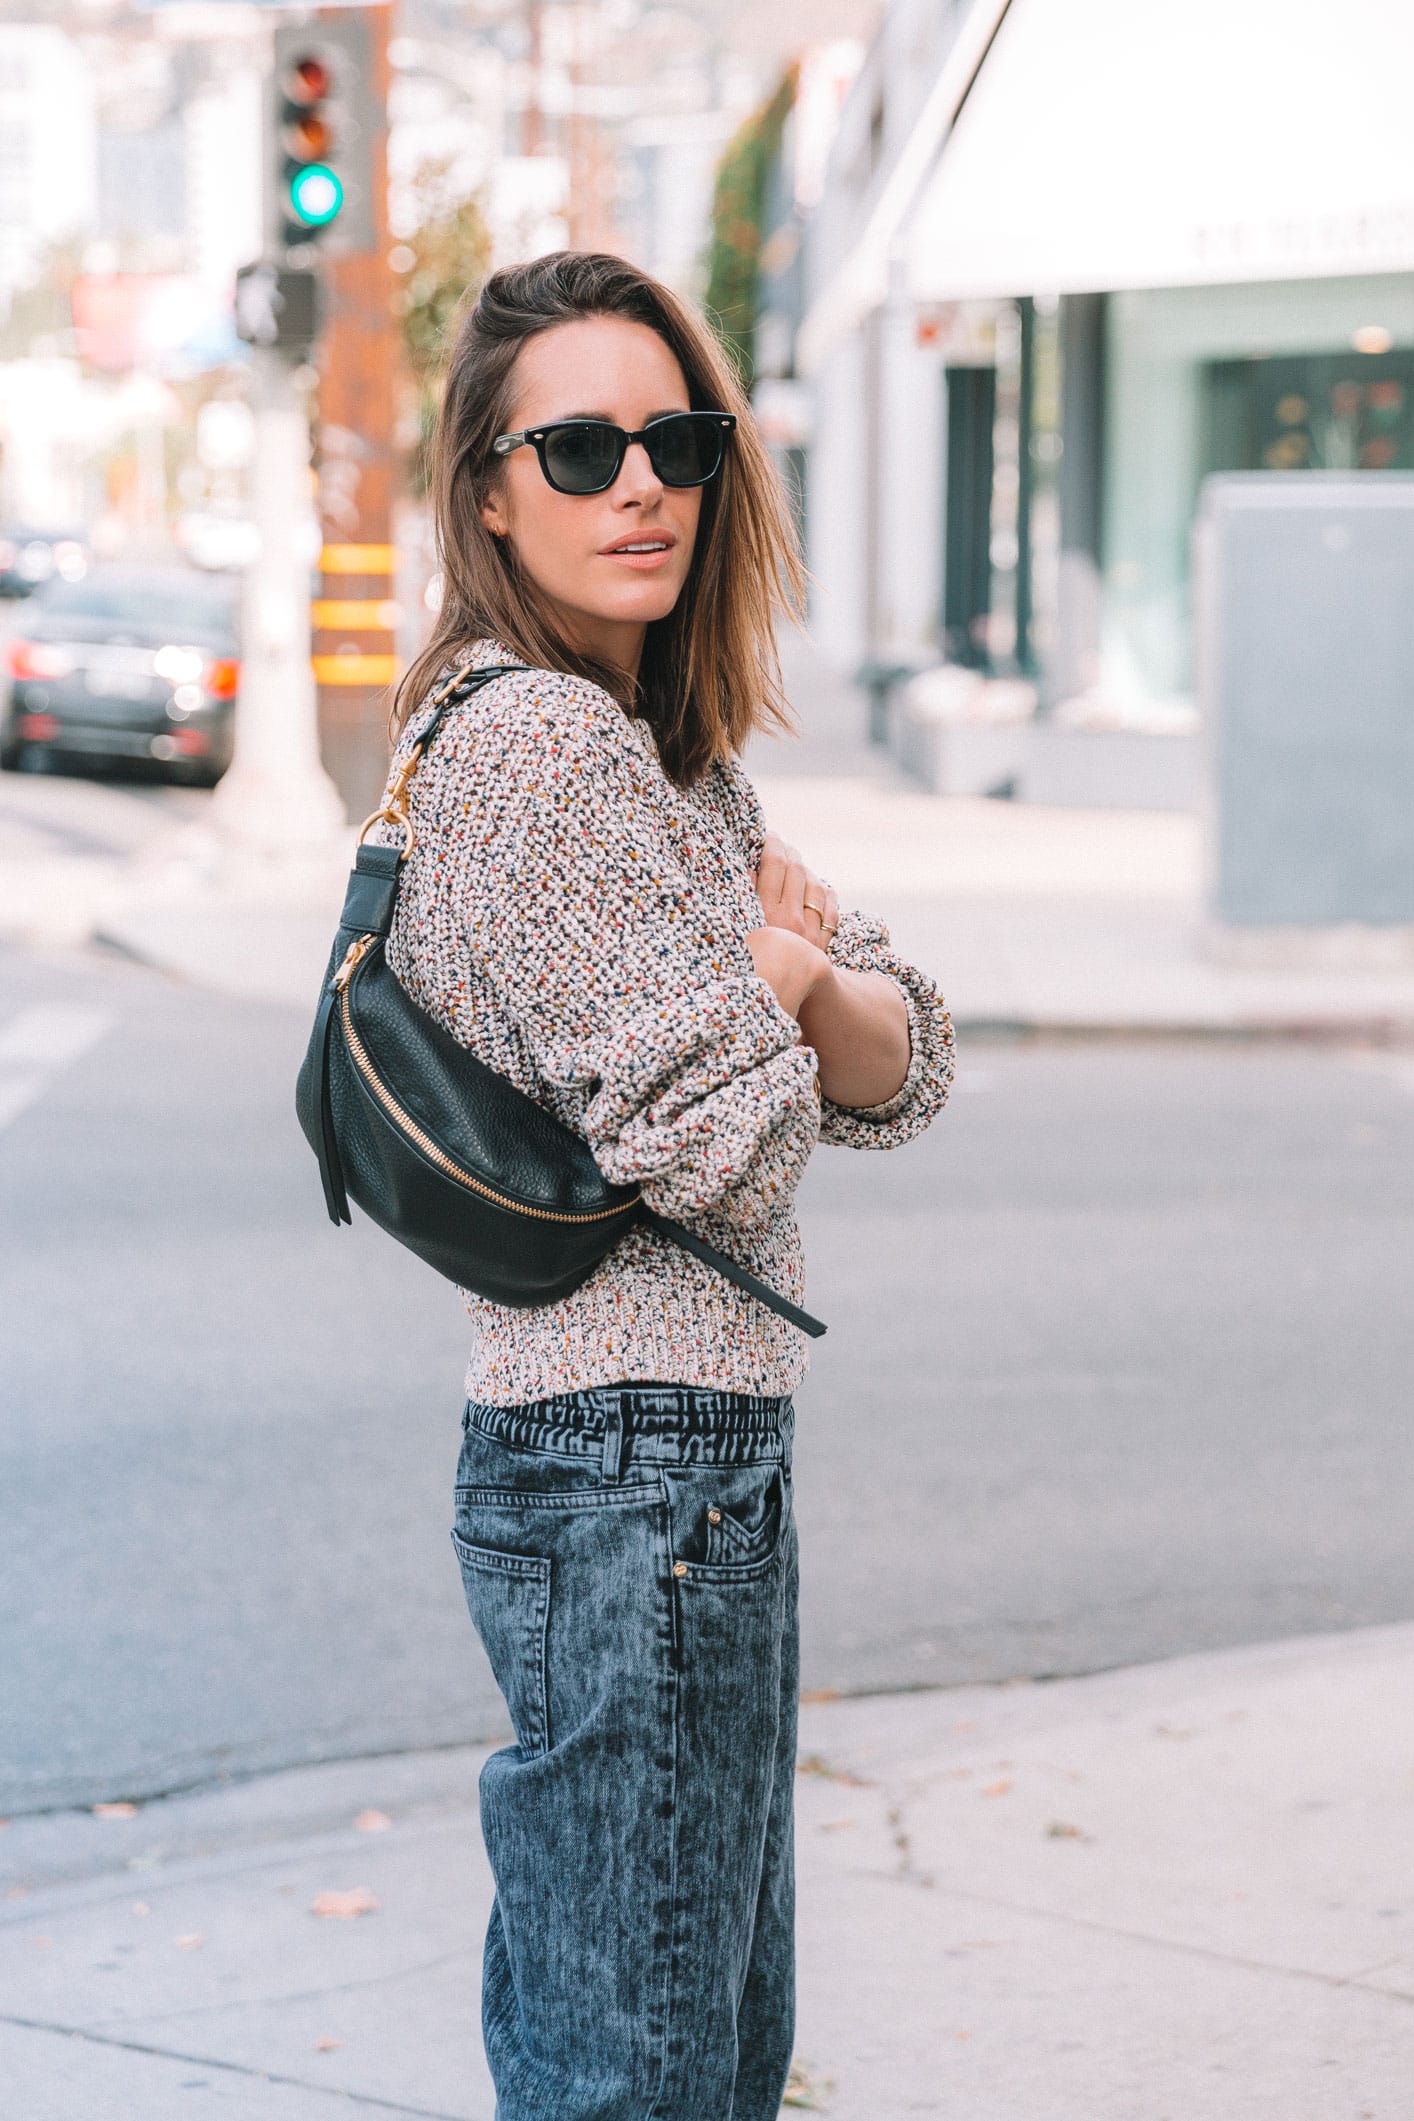 Louise Roe wearing 2019 trends stonewash jeans and chunky knit sweater